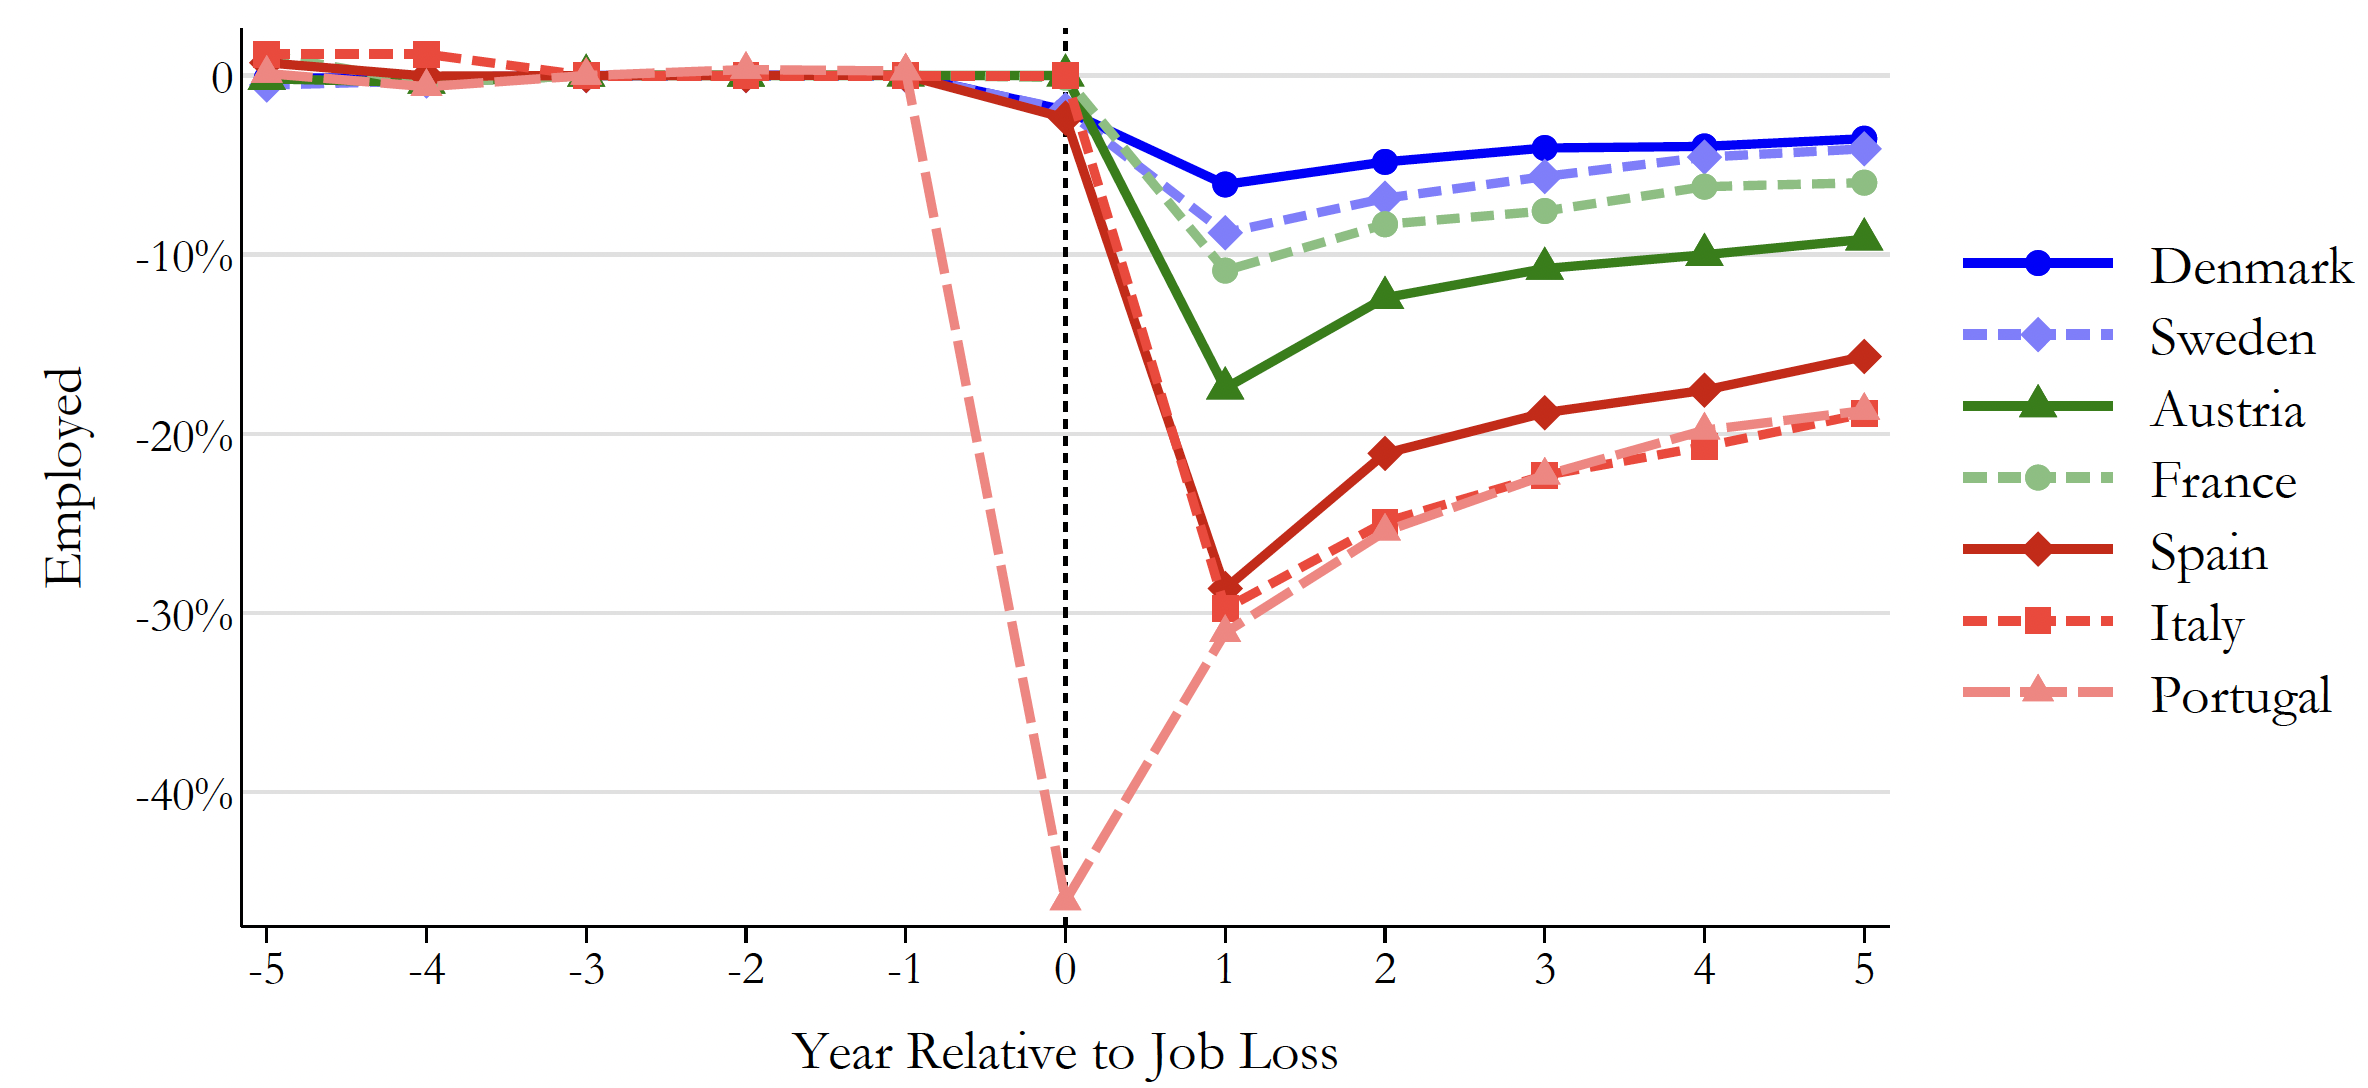 The unequal cost of job loss across countries 3